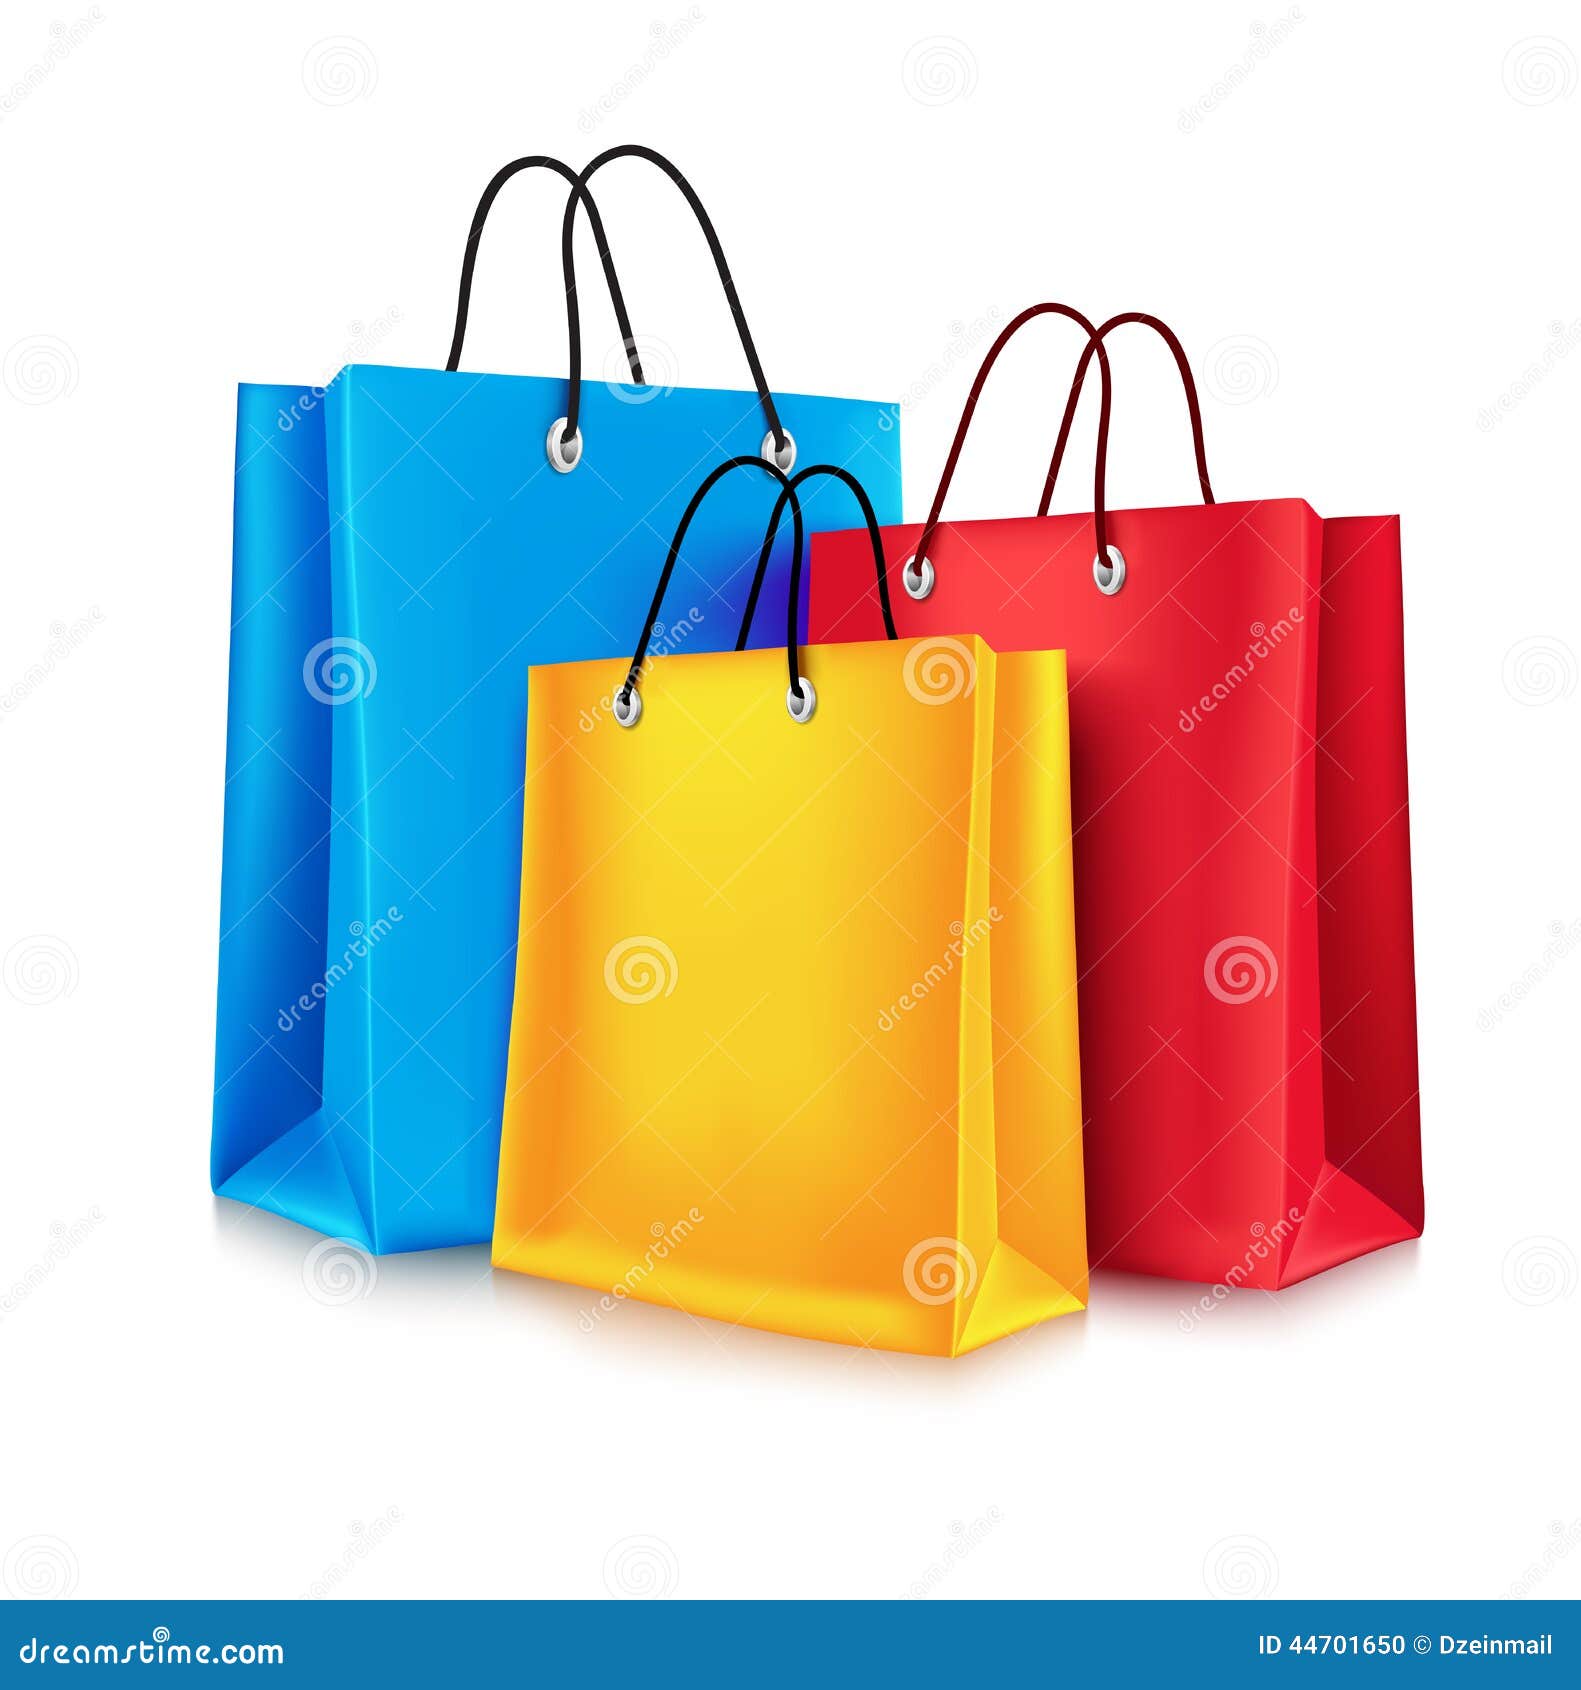 Colorful Shopping Bags stock vector. Illustration of packaging - 44701650